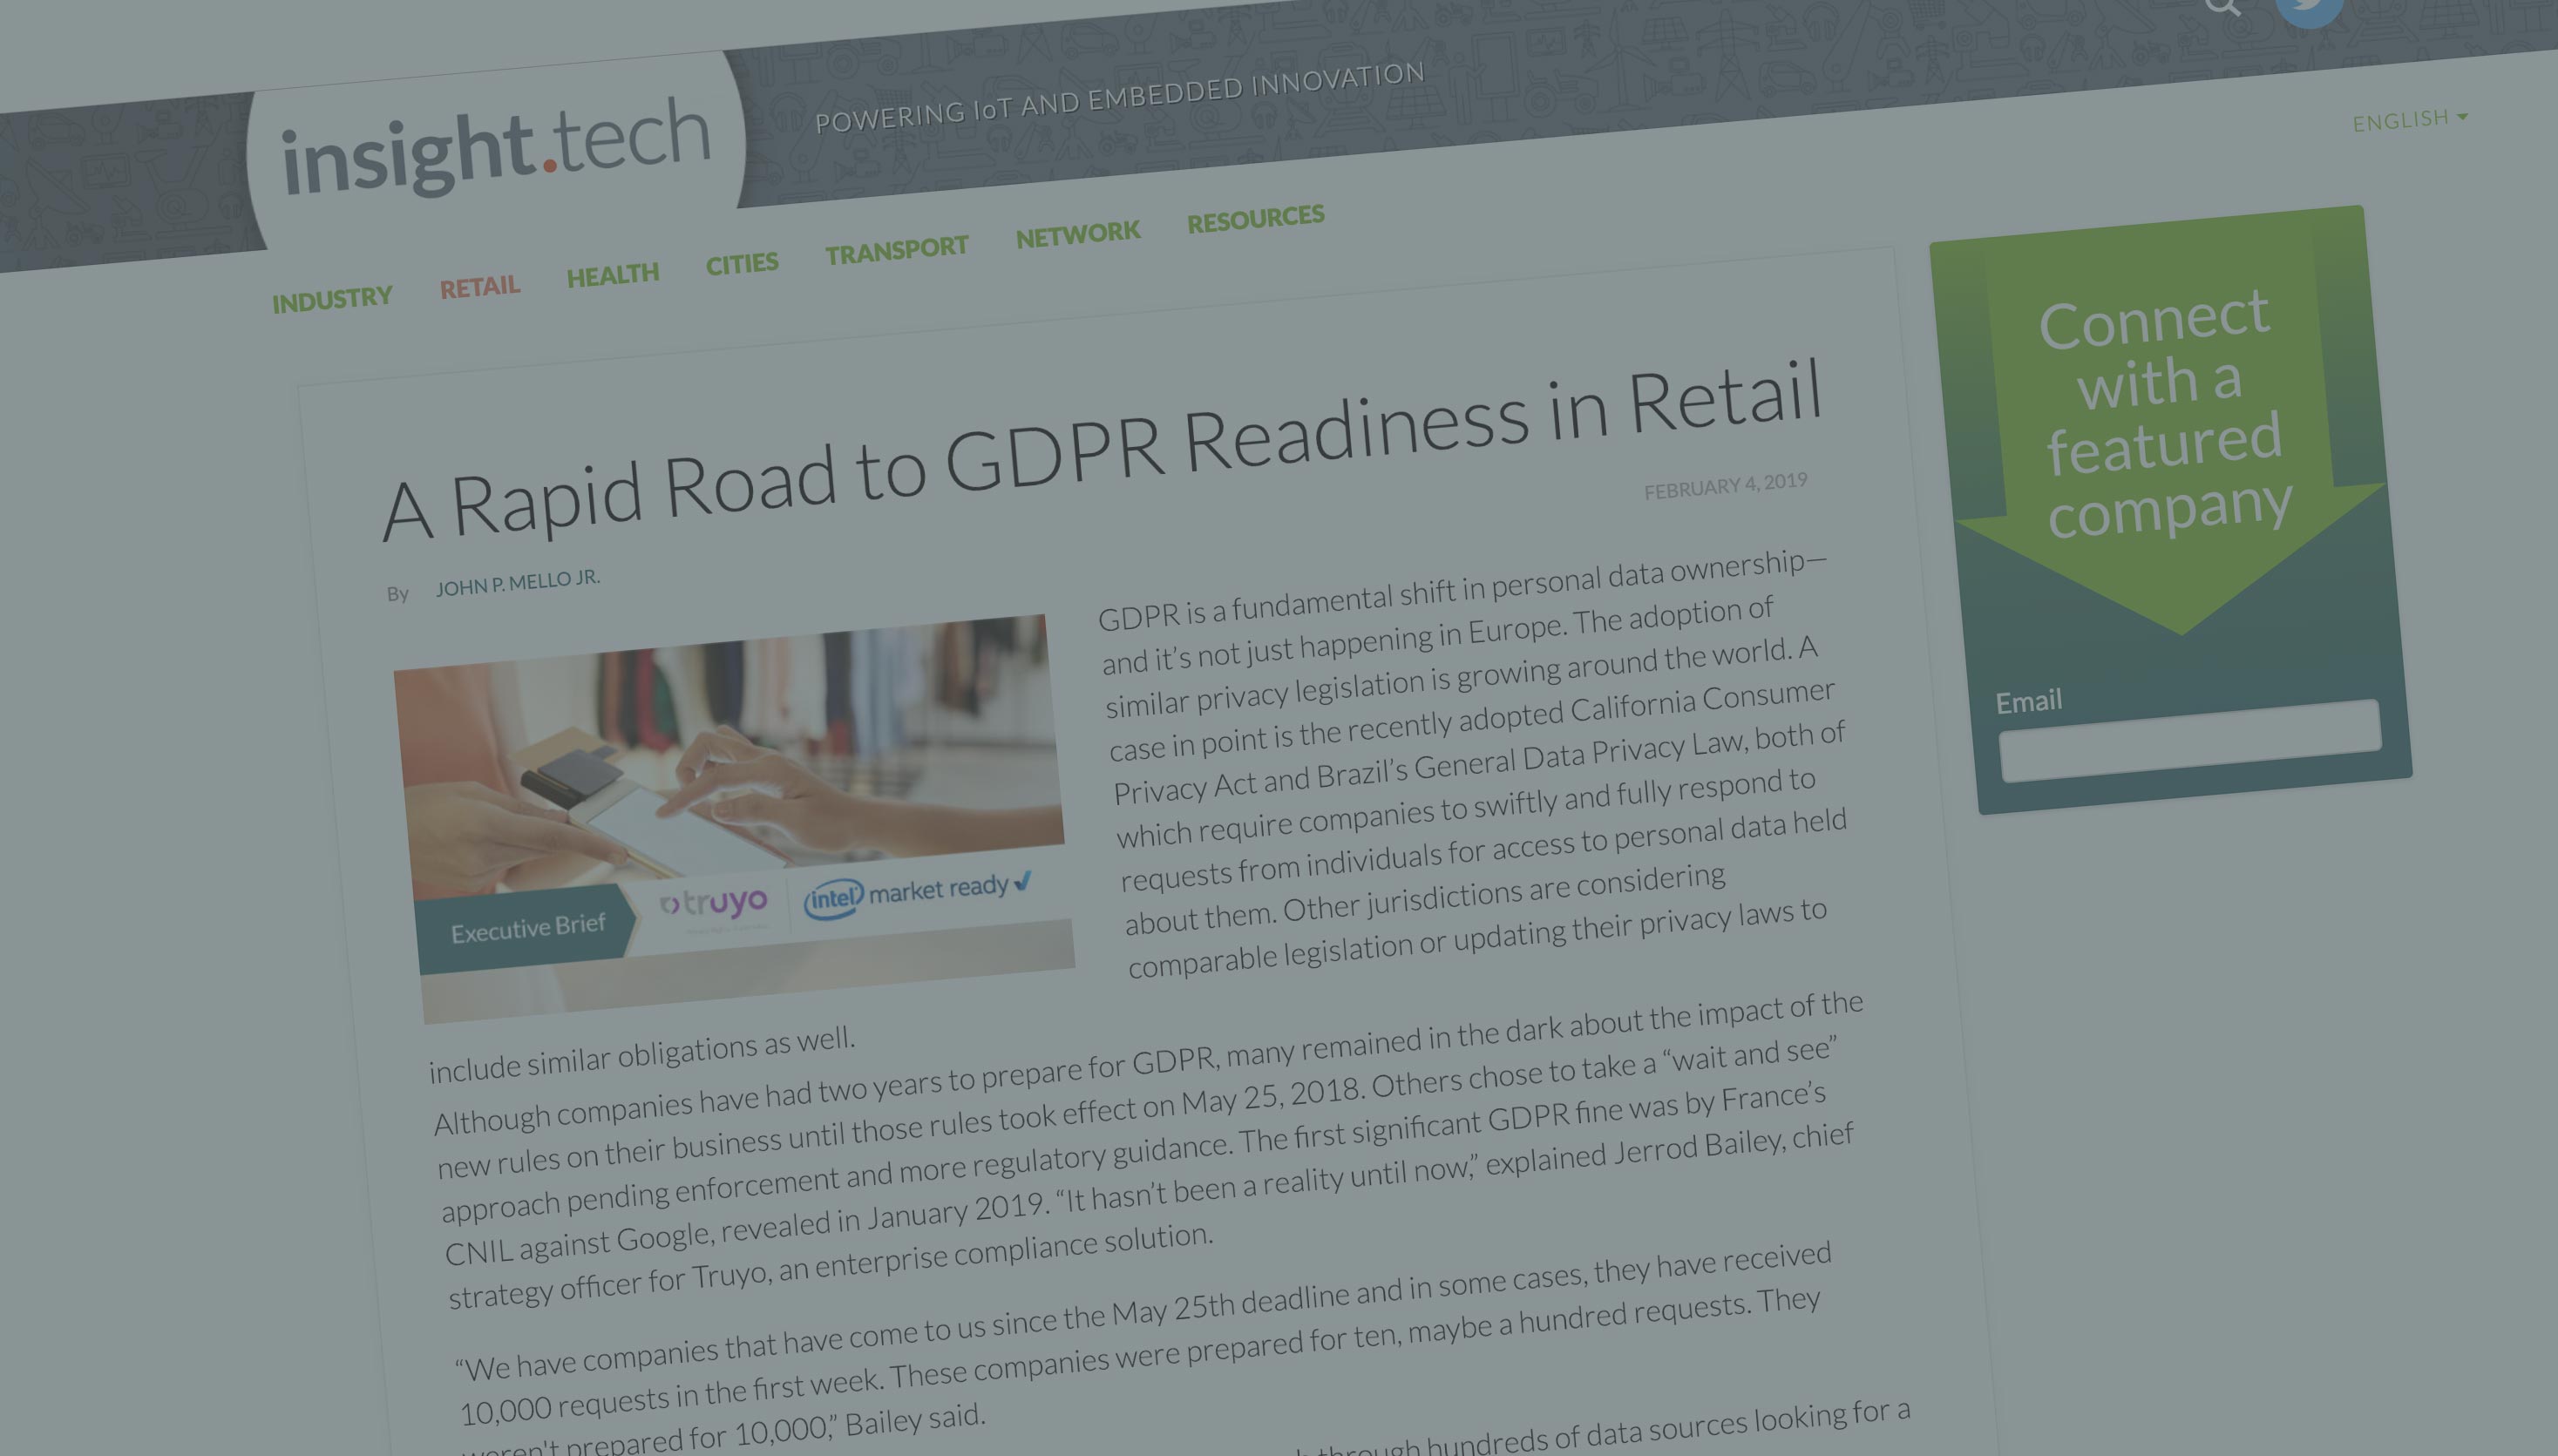 post-apid-road-to-gdpr-readiness-in-retail